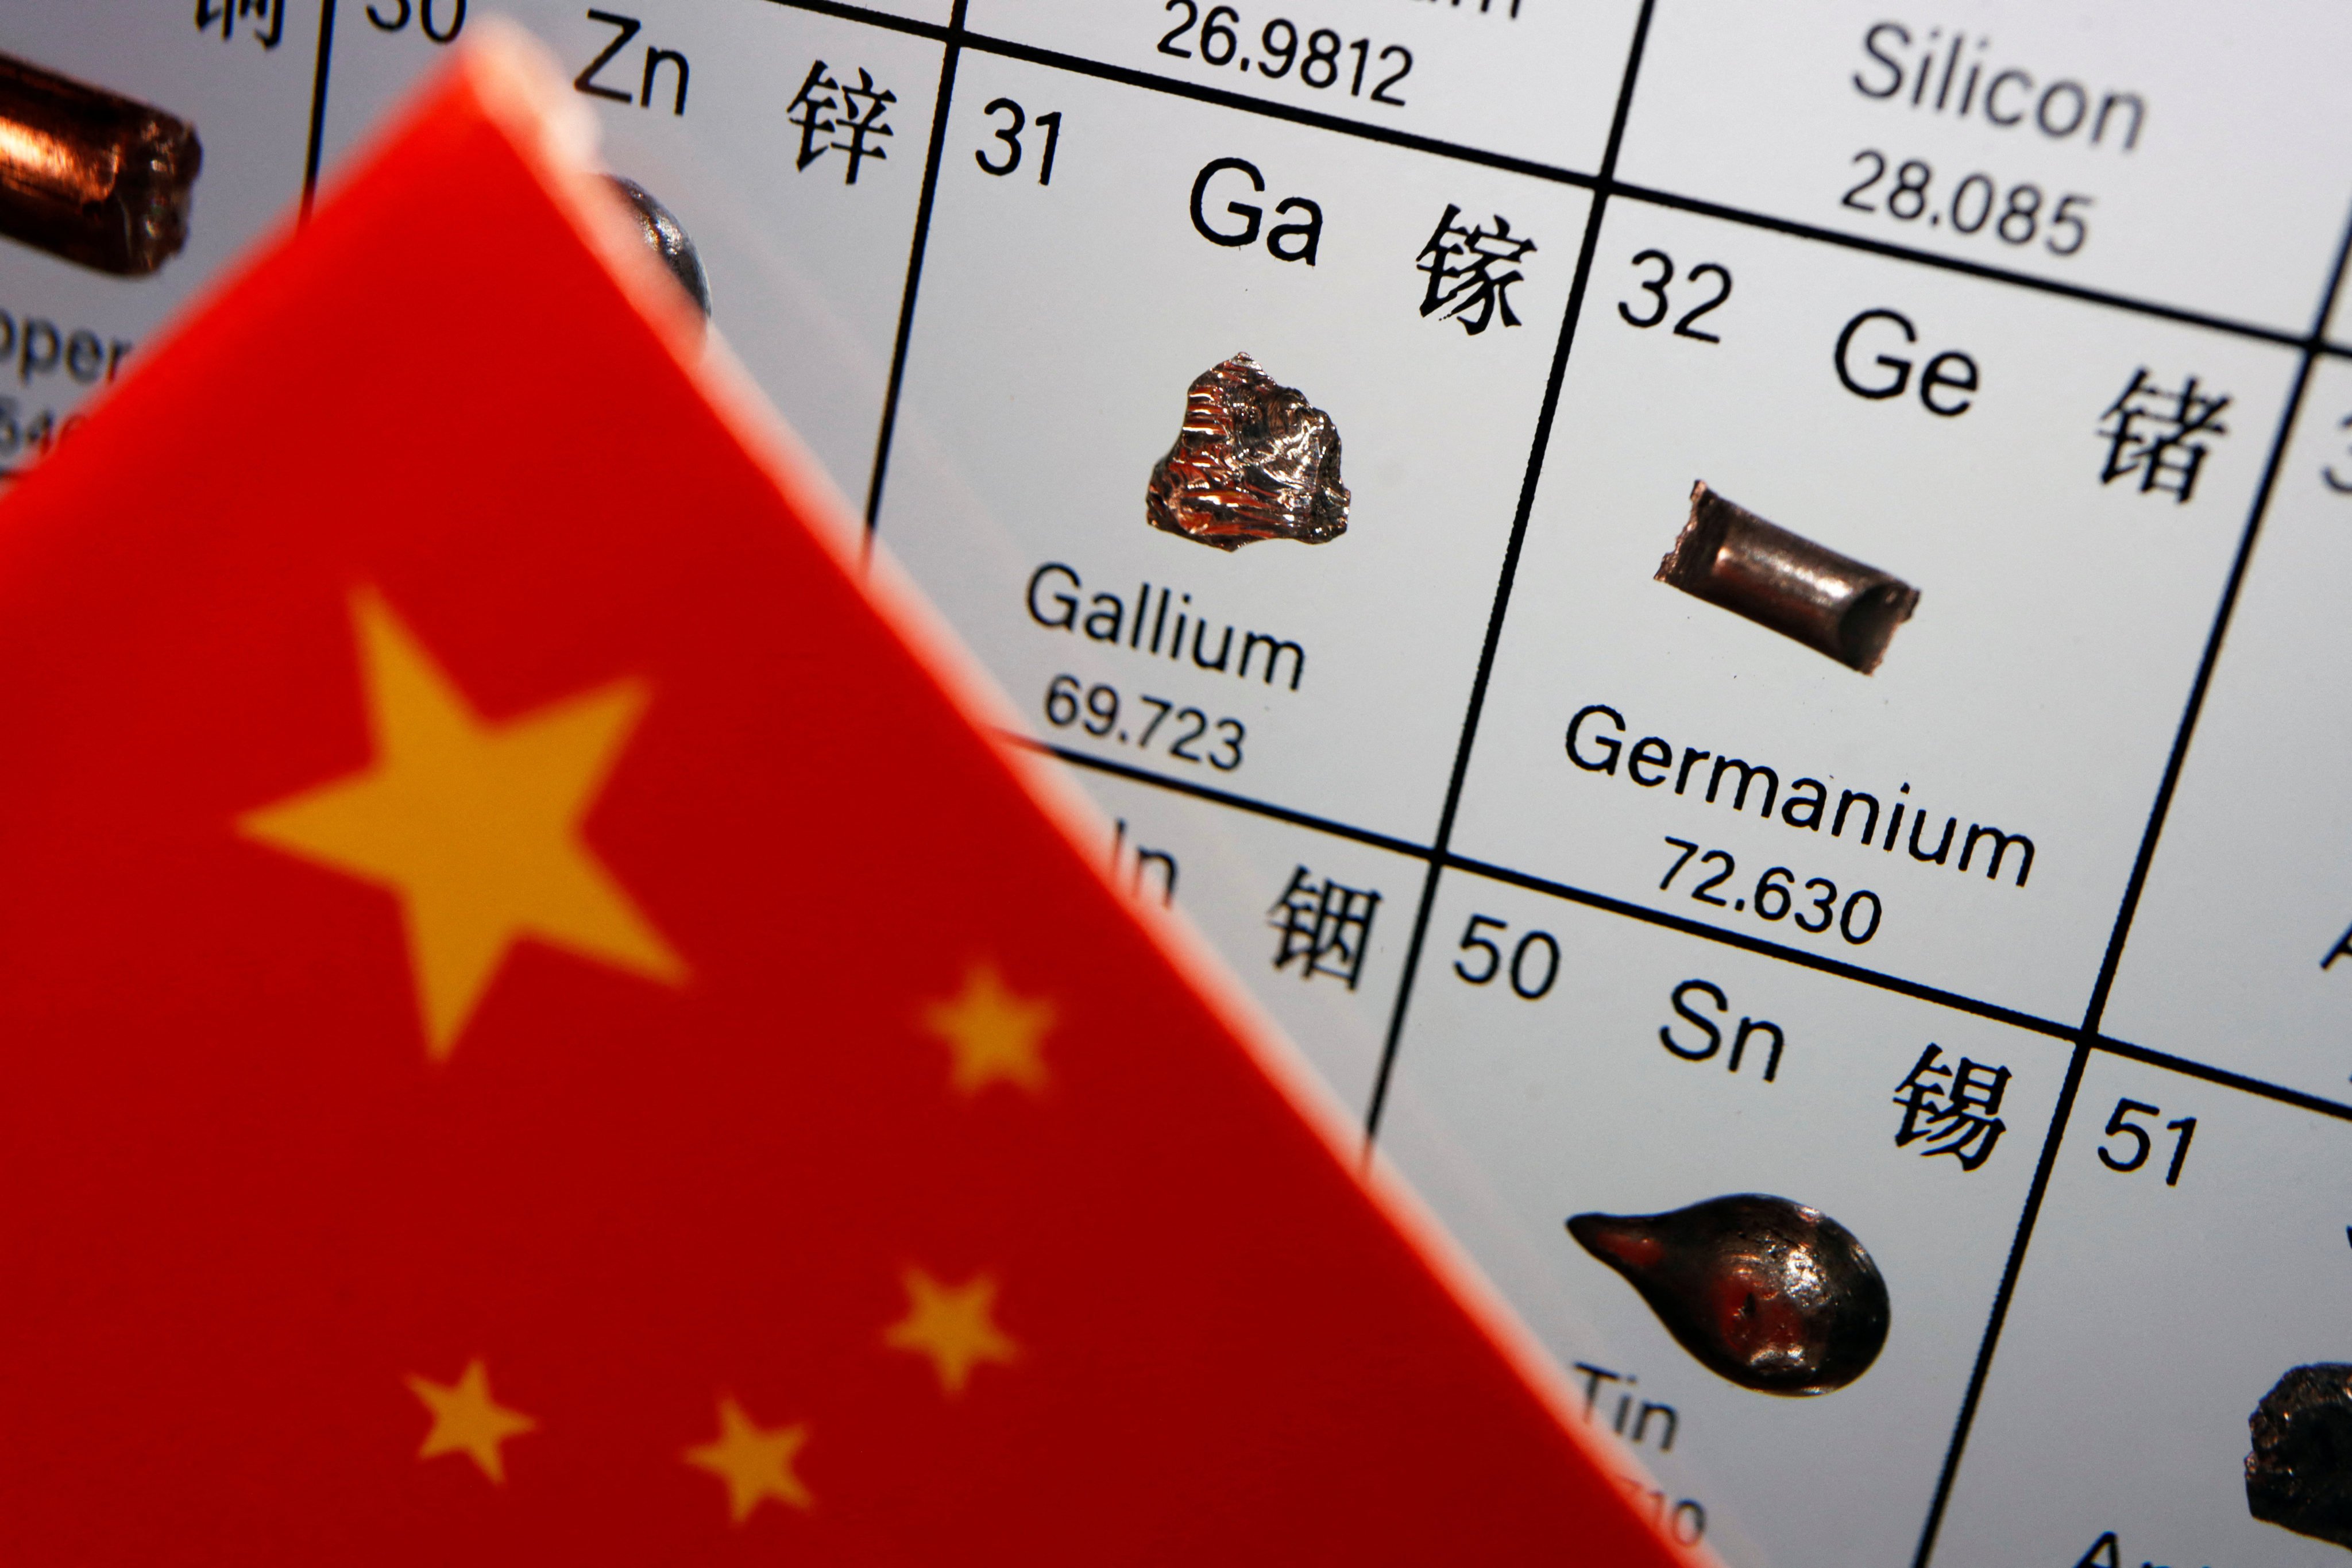 China dominates global production of gallium and germanium, chemical elements used in semiconductors. Photo: Reuters